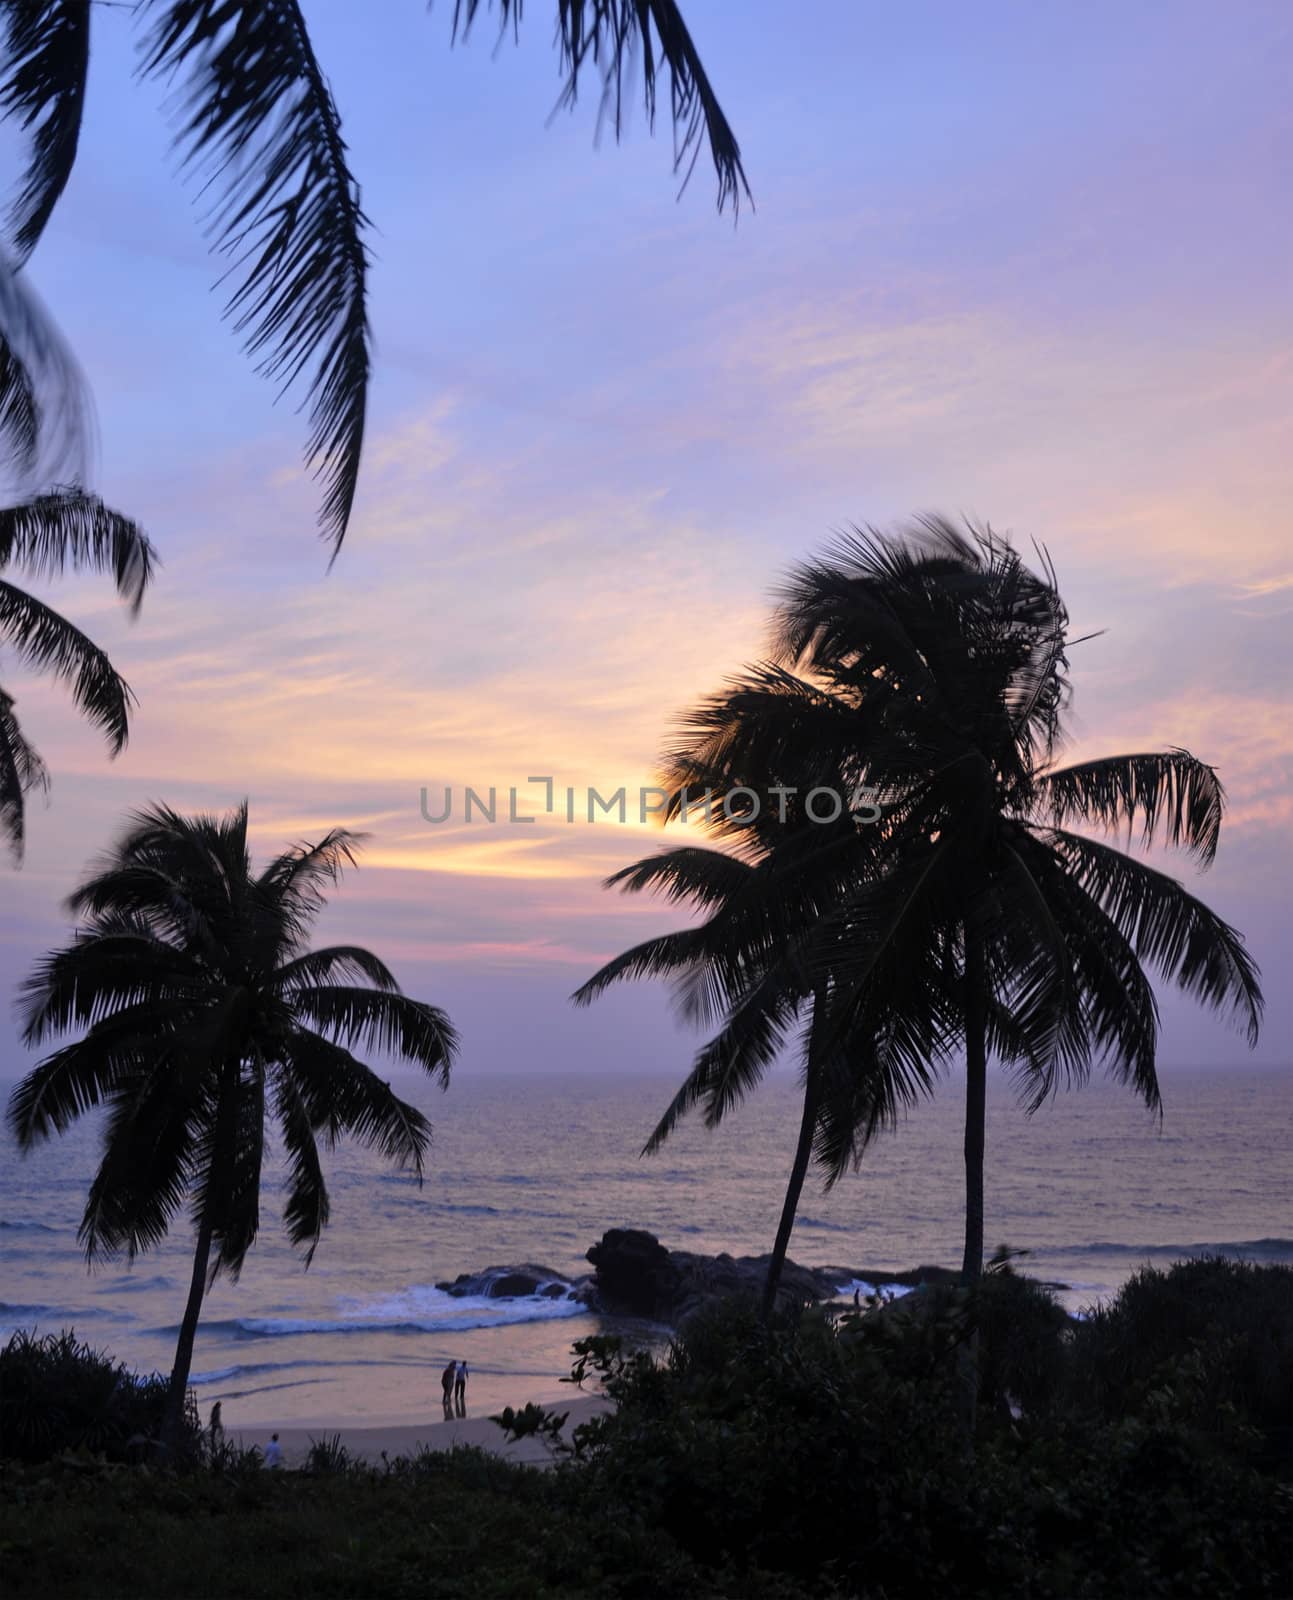 Palm trees at the beach at a beautiful sunset in Sri Lanka